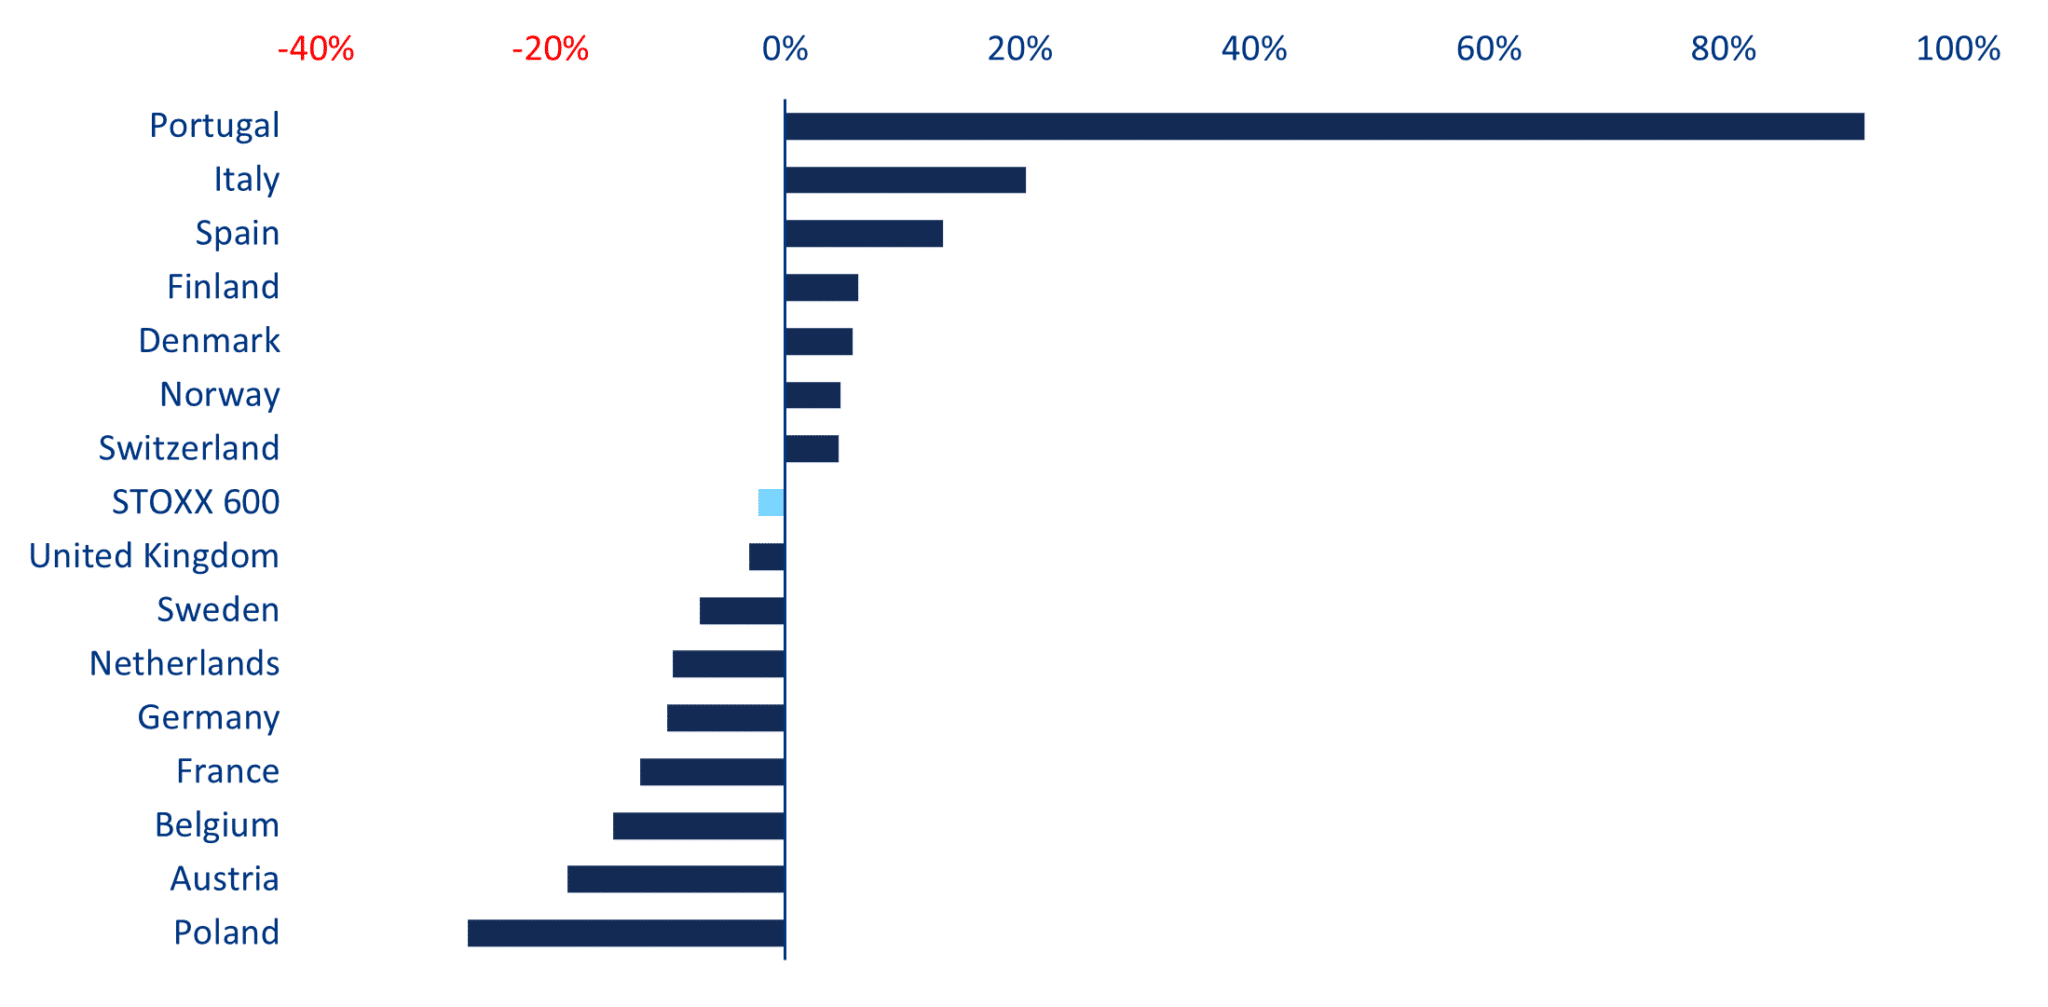 CHART 6: STOXX 600 - ESTIMATED EARNINGS GROWTH RATE IN Q1 2024 BY COUNTRY